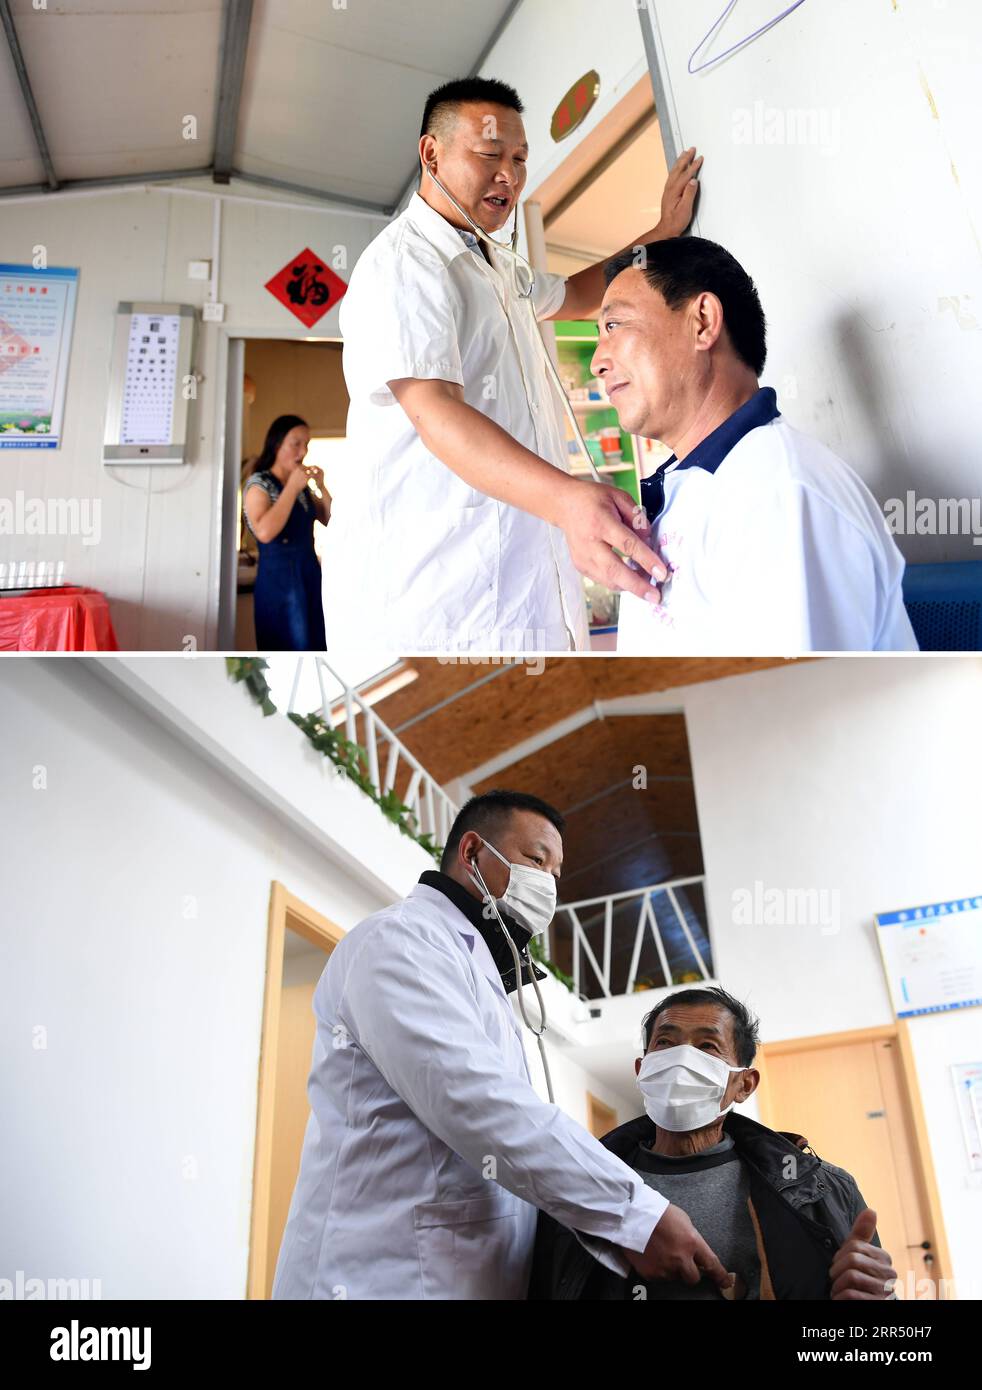 201218 -- JINZHAI, Dec. 18, 2020 -- Combo photo shows Yu Jiajun treats a patient at the health station on Sept. 14, 2017 upper and Dec. 16, 2020 lower in Jinzhai County of Luan City, east China s Anhui Province. Deep in the Xianghongdian Reservoir area in Jinzhai County of Luan City, east China s Anhui Province, there is an isolated island, which used to be home to over 40 poor families. Yu Jiajun, 42, is the only doctor in the village. In the past, there was no health station on the island. Villagers had to row a boat for two or three hours to go to the health center in Mabu Township to see t Stock Photo